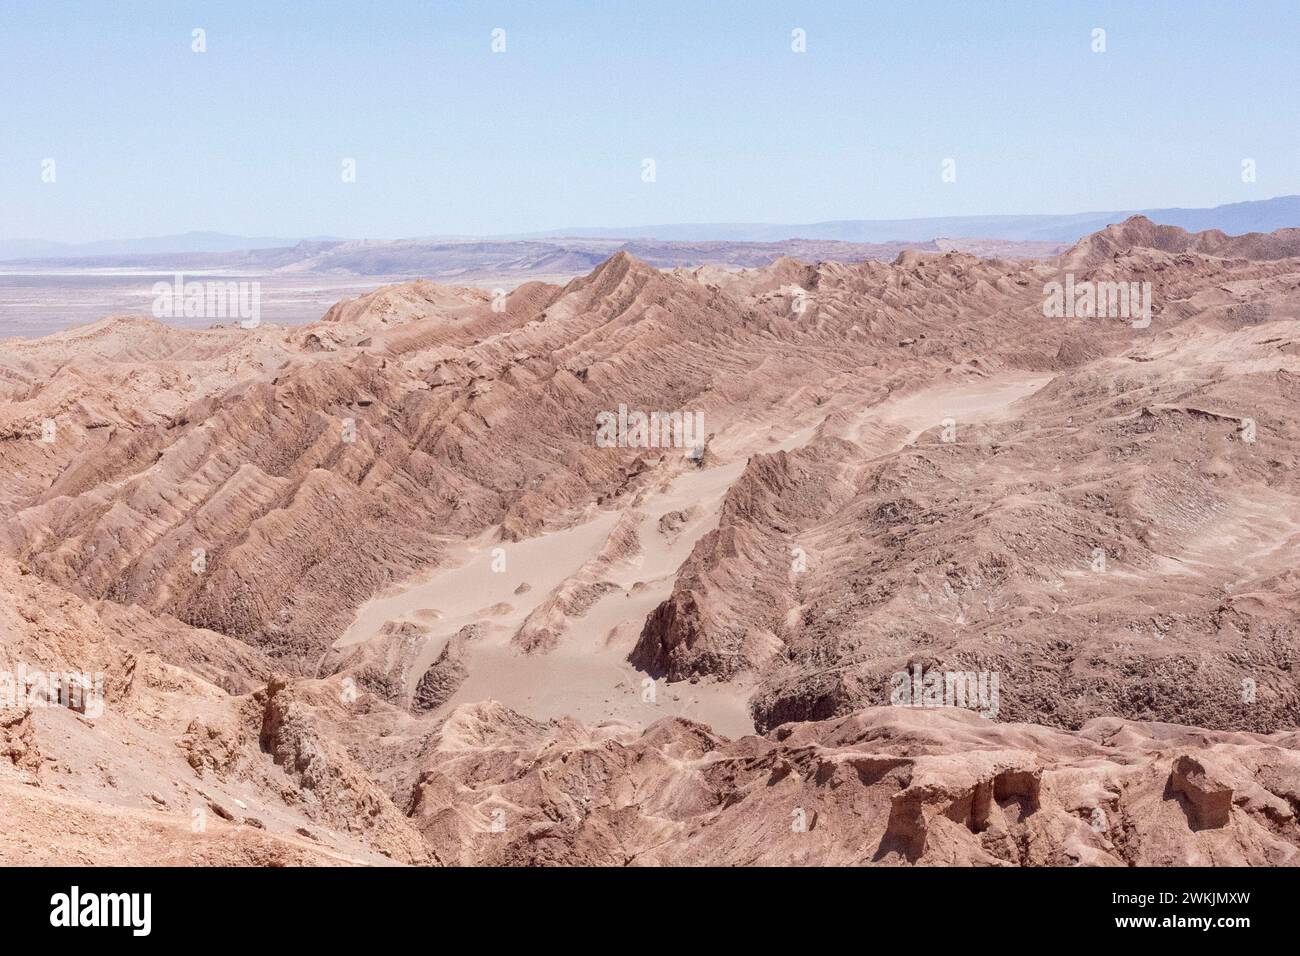 Valley of the moons (Valle de la Luna), Atacama Desert, Chile. Where the surface replicates that of the moon and is used for space exploration. Stock Photo